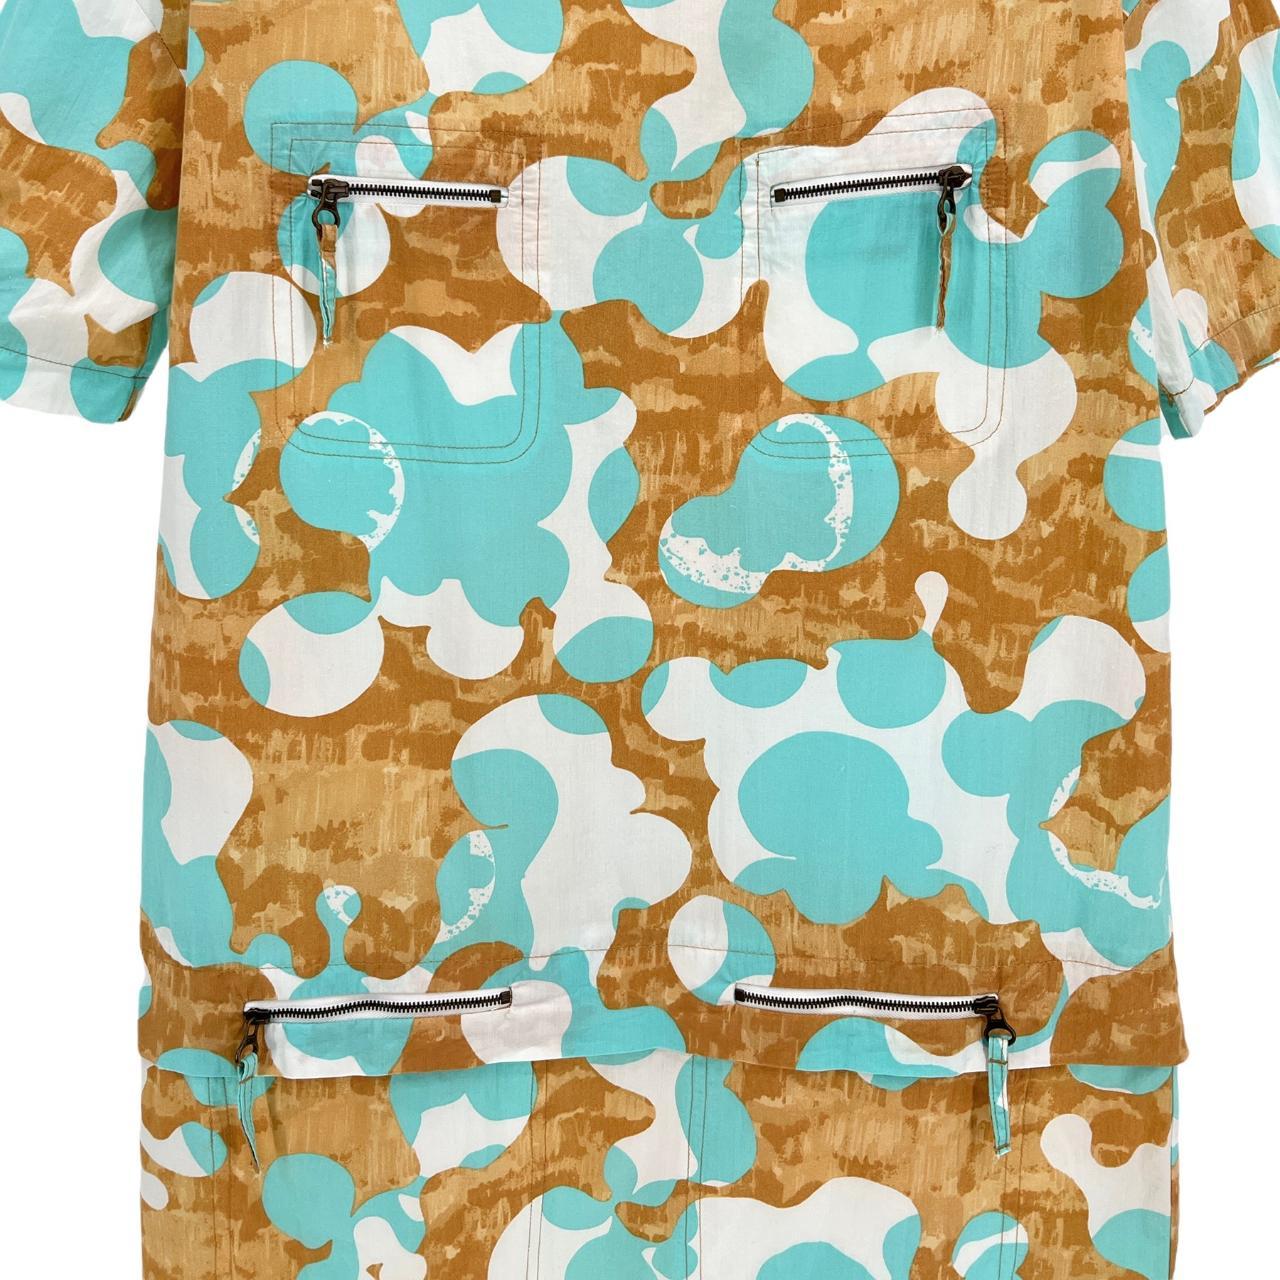 Product Image 2 - See by Chloé Shift Dress.

Pop-arty,